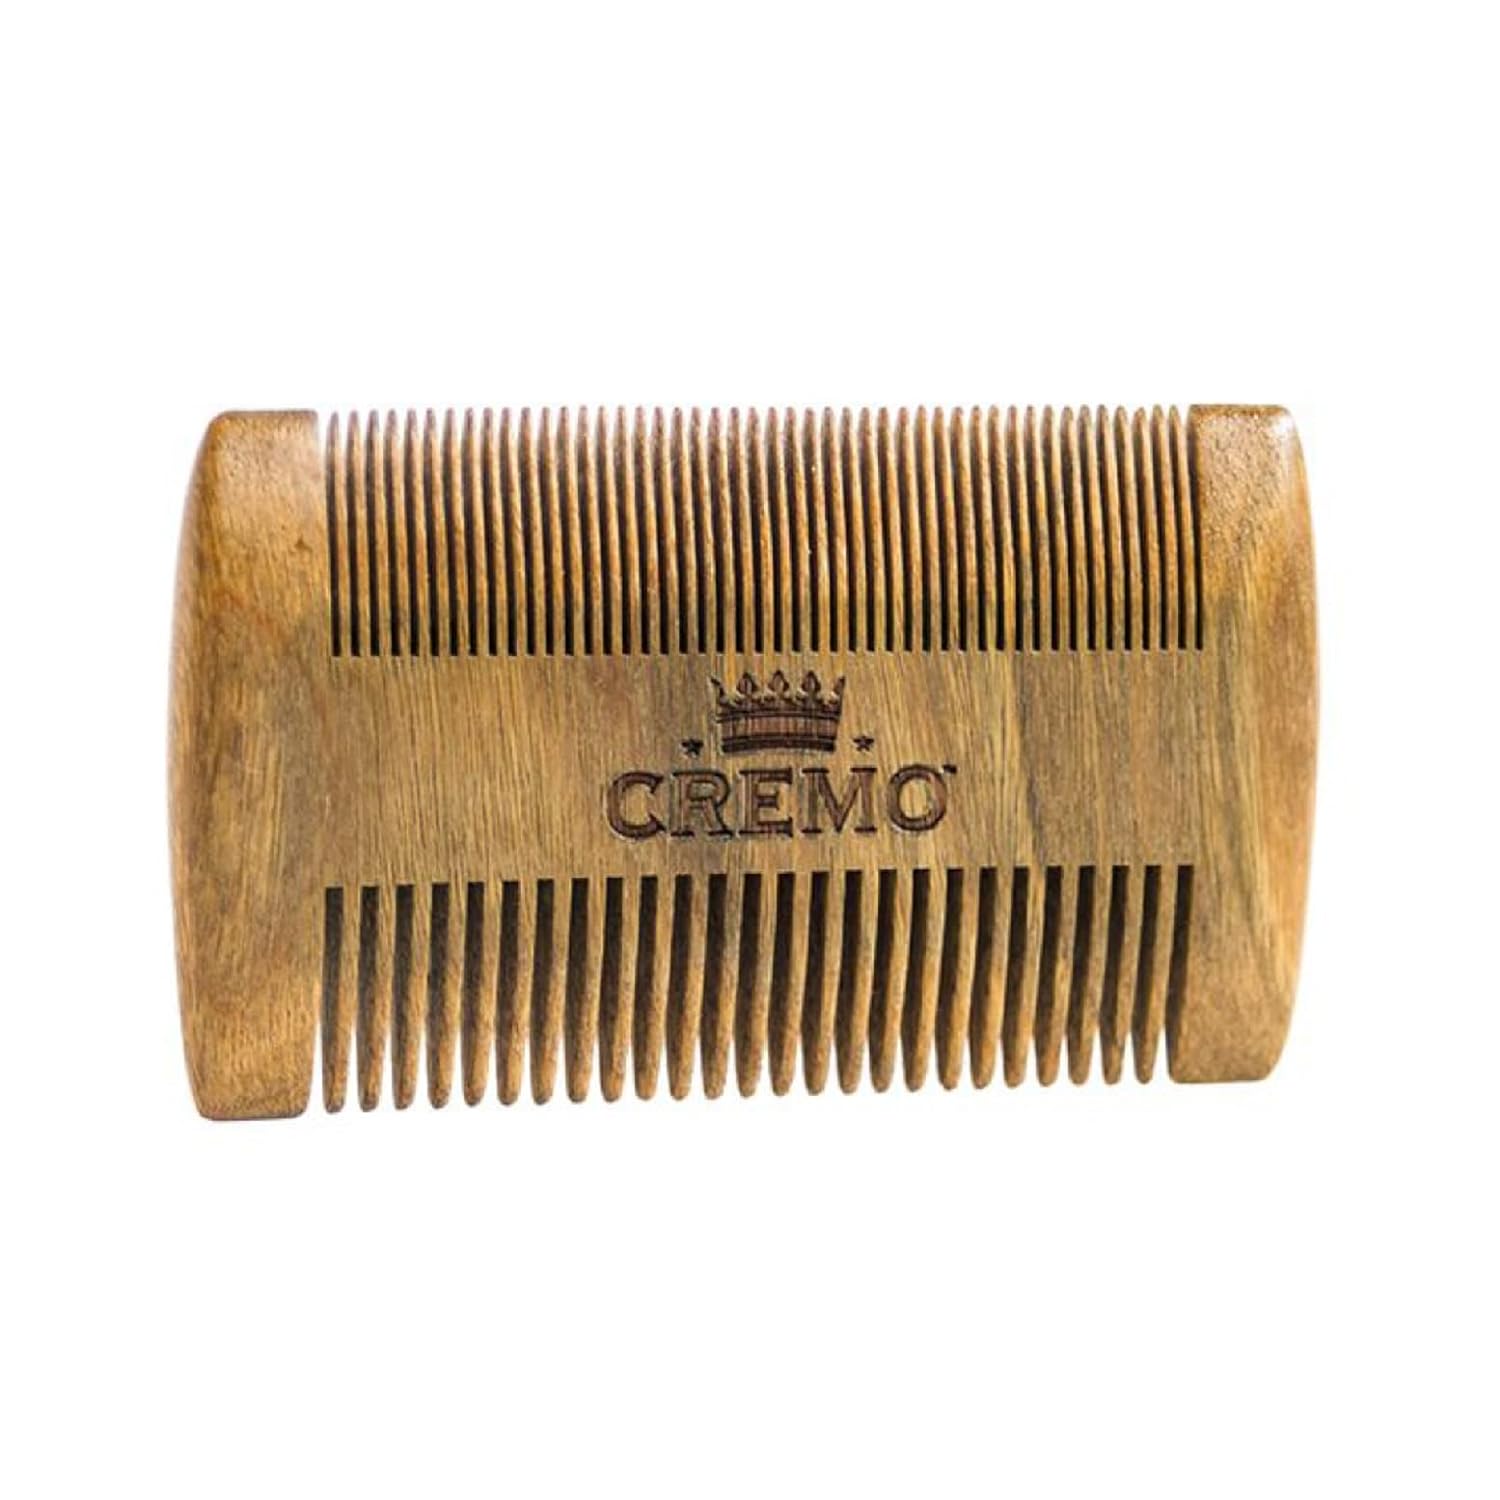 Cremo Beard Accessories, Dual-Sided Beard Comb Made from Verawood - Shape, Style And Groom Any Length Facial Hair : Beauty & Personal Care